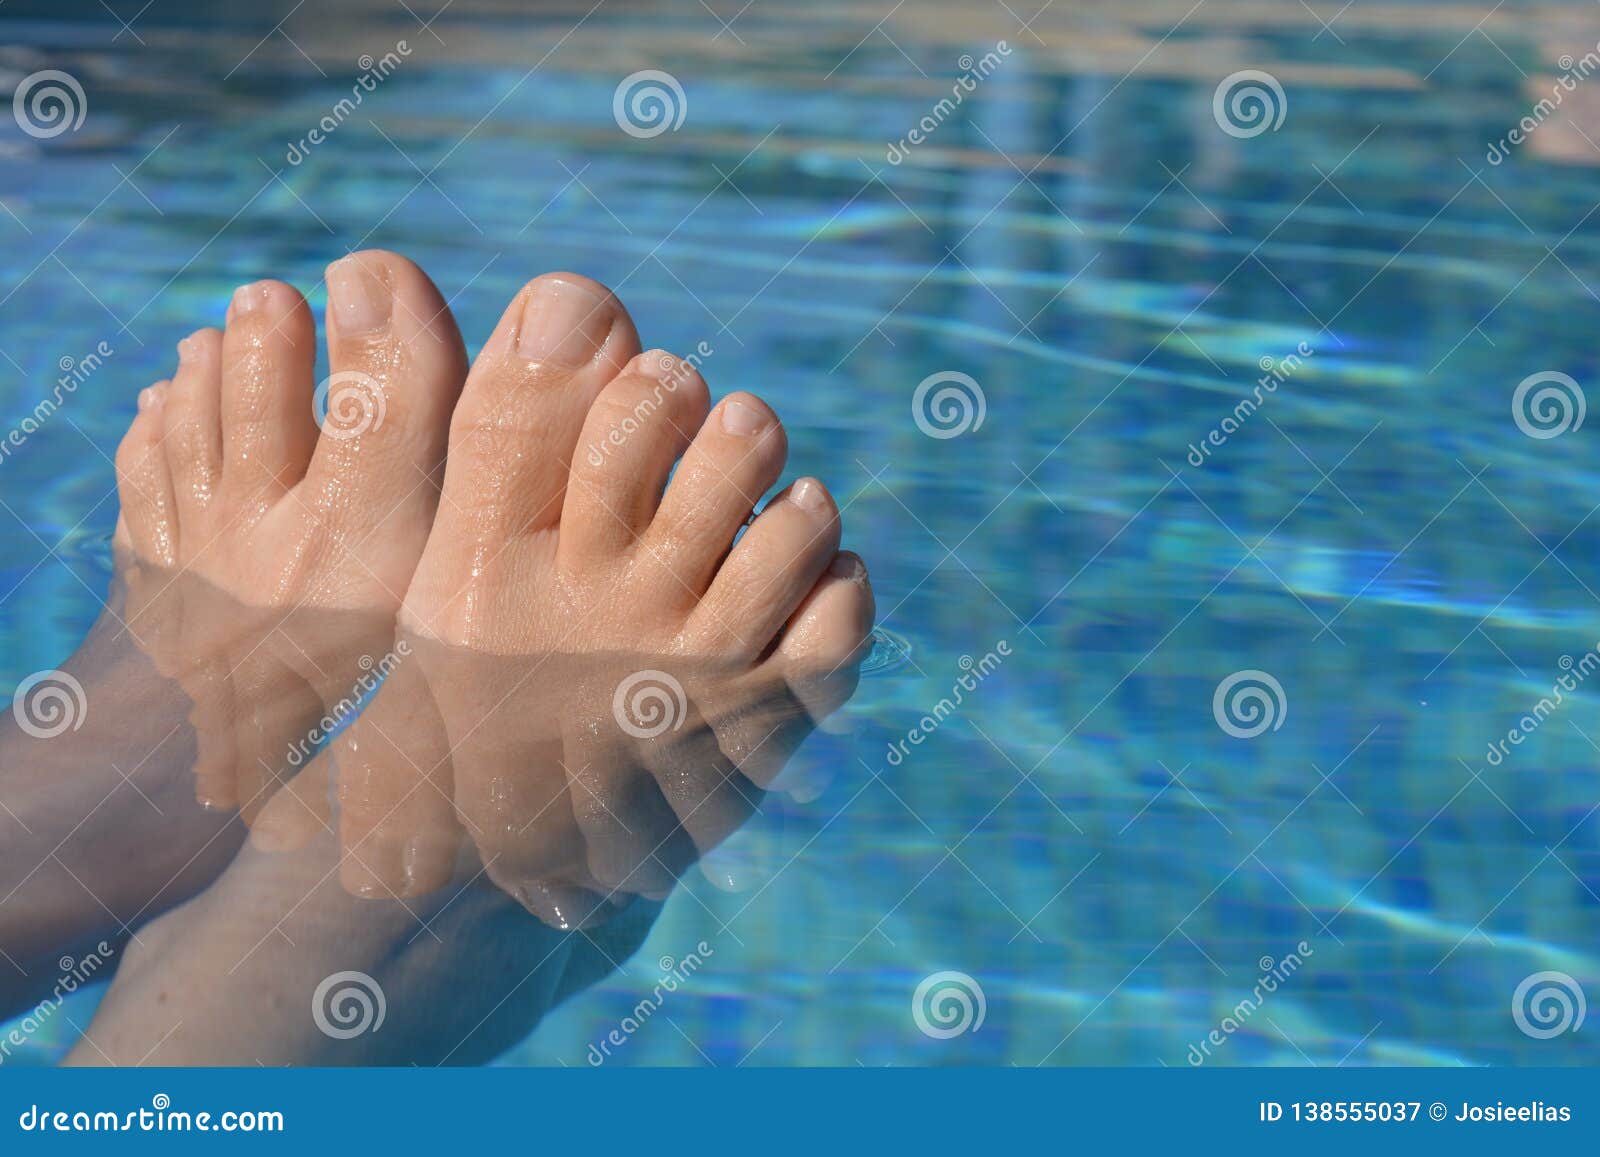 Summer Vibes, Feet in Swimming Pool, Keeping Cool Stock Image - Image